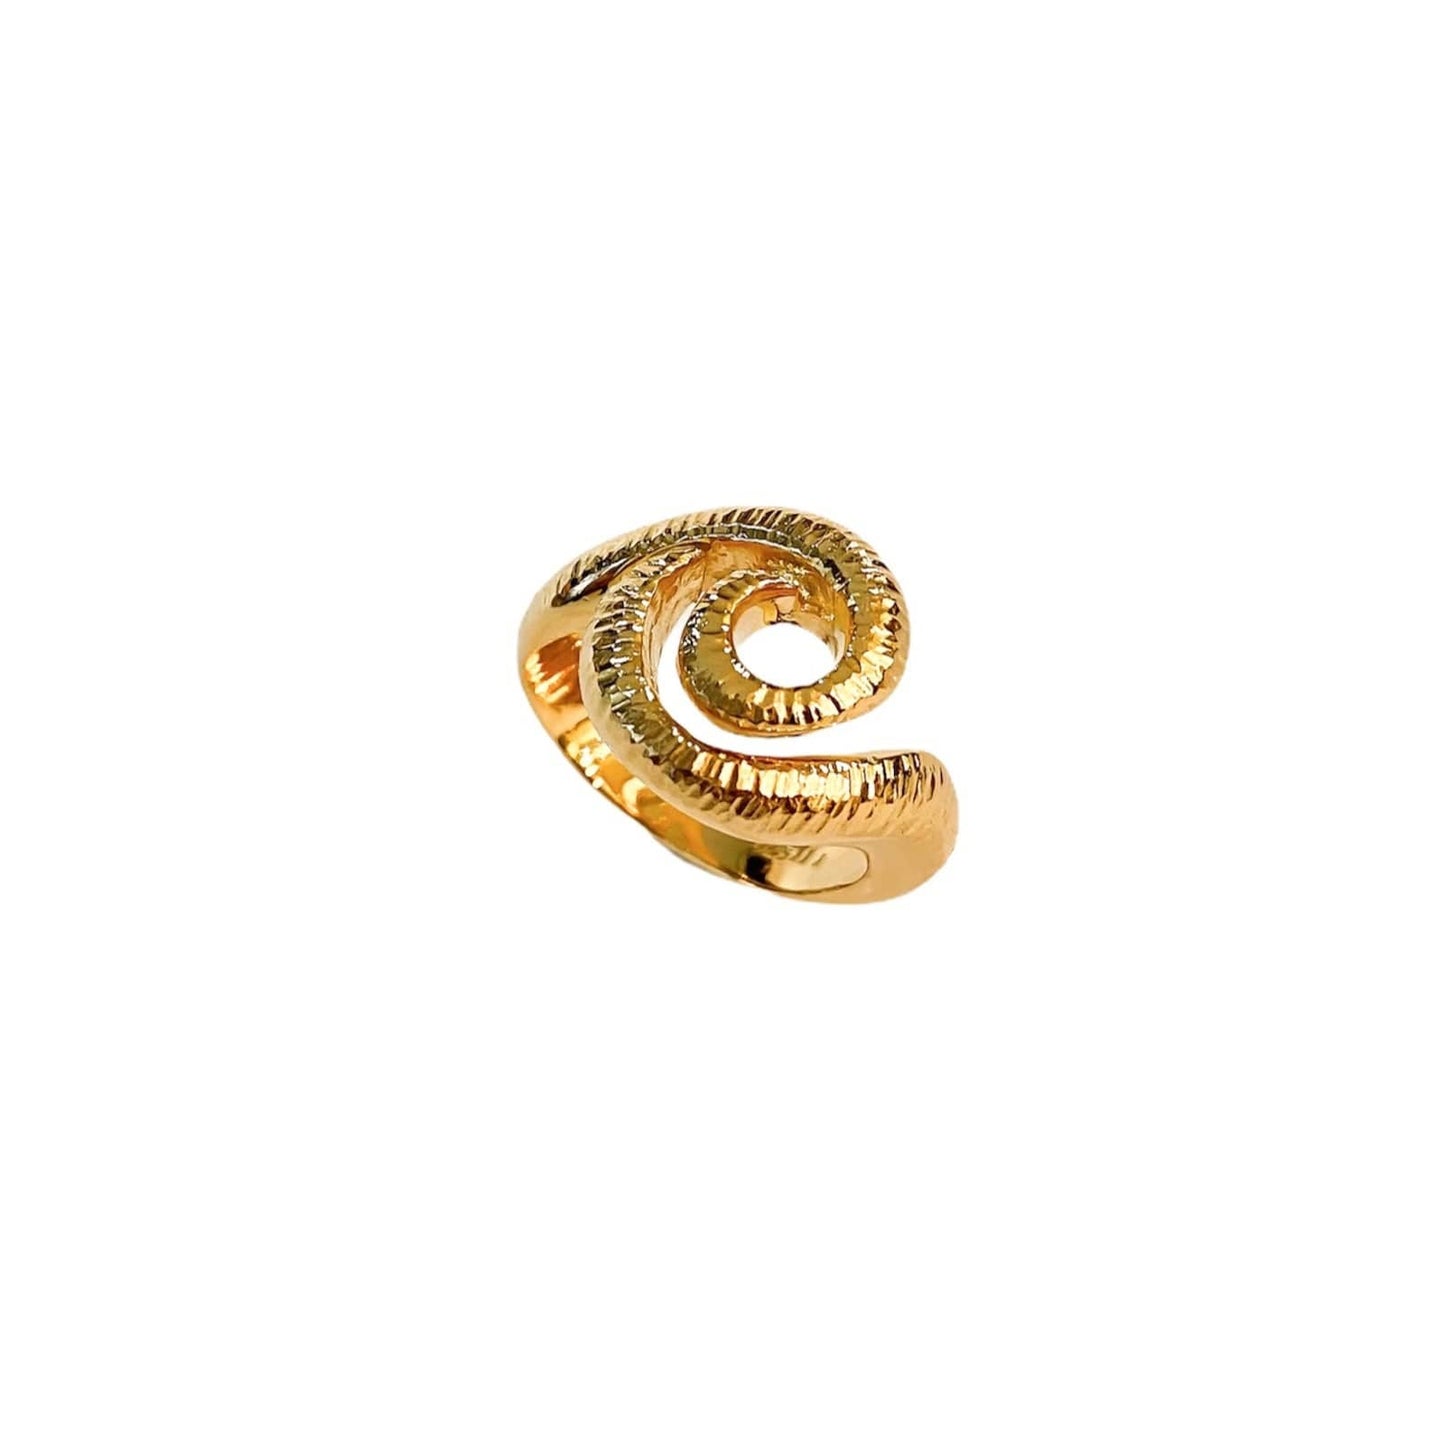 Surrea Raw gold plated silver ring, side view.